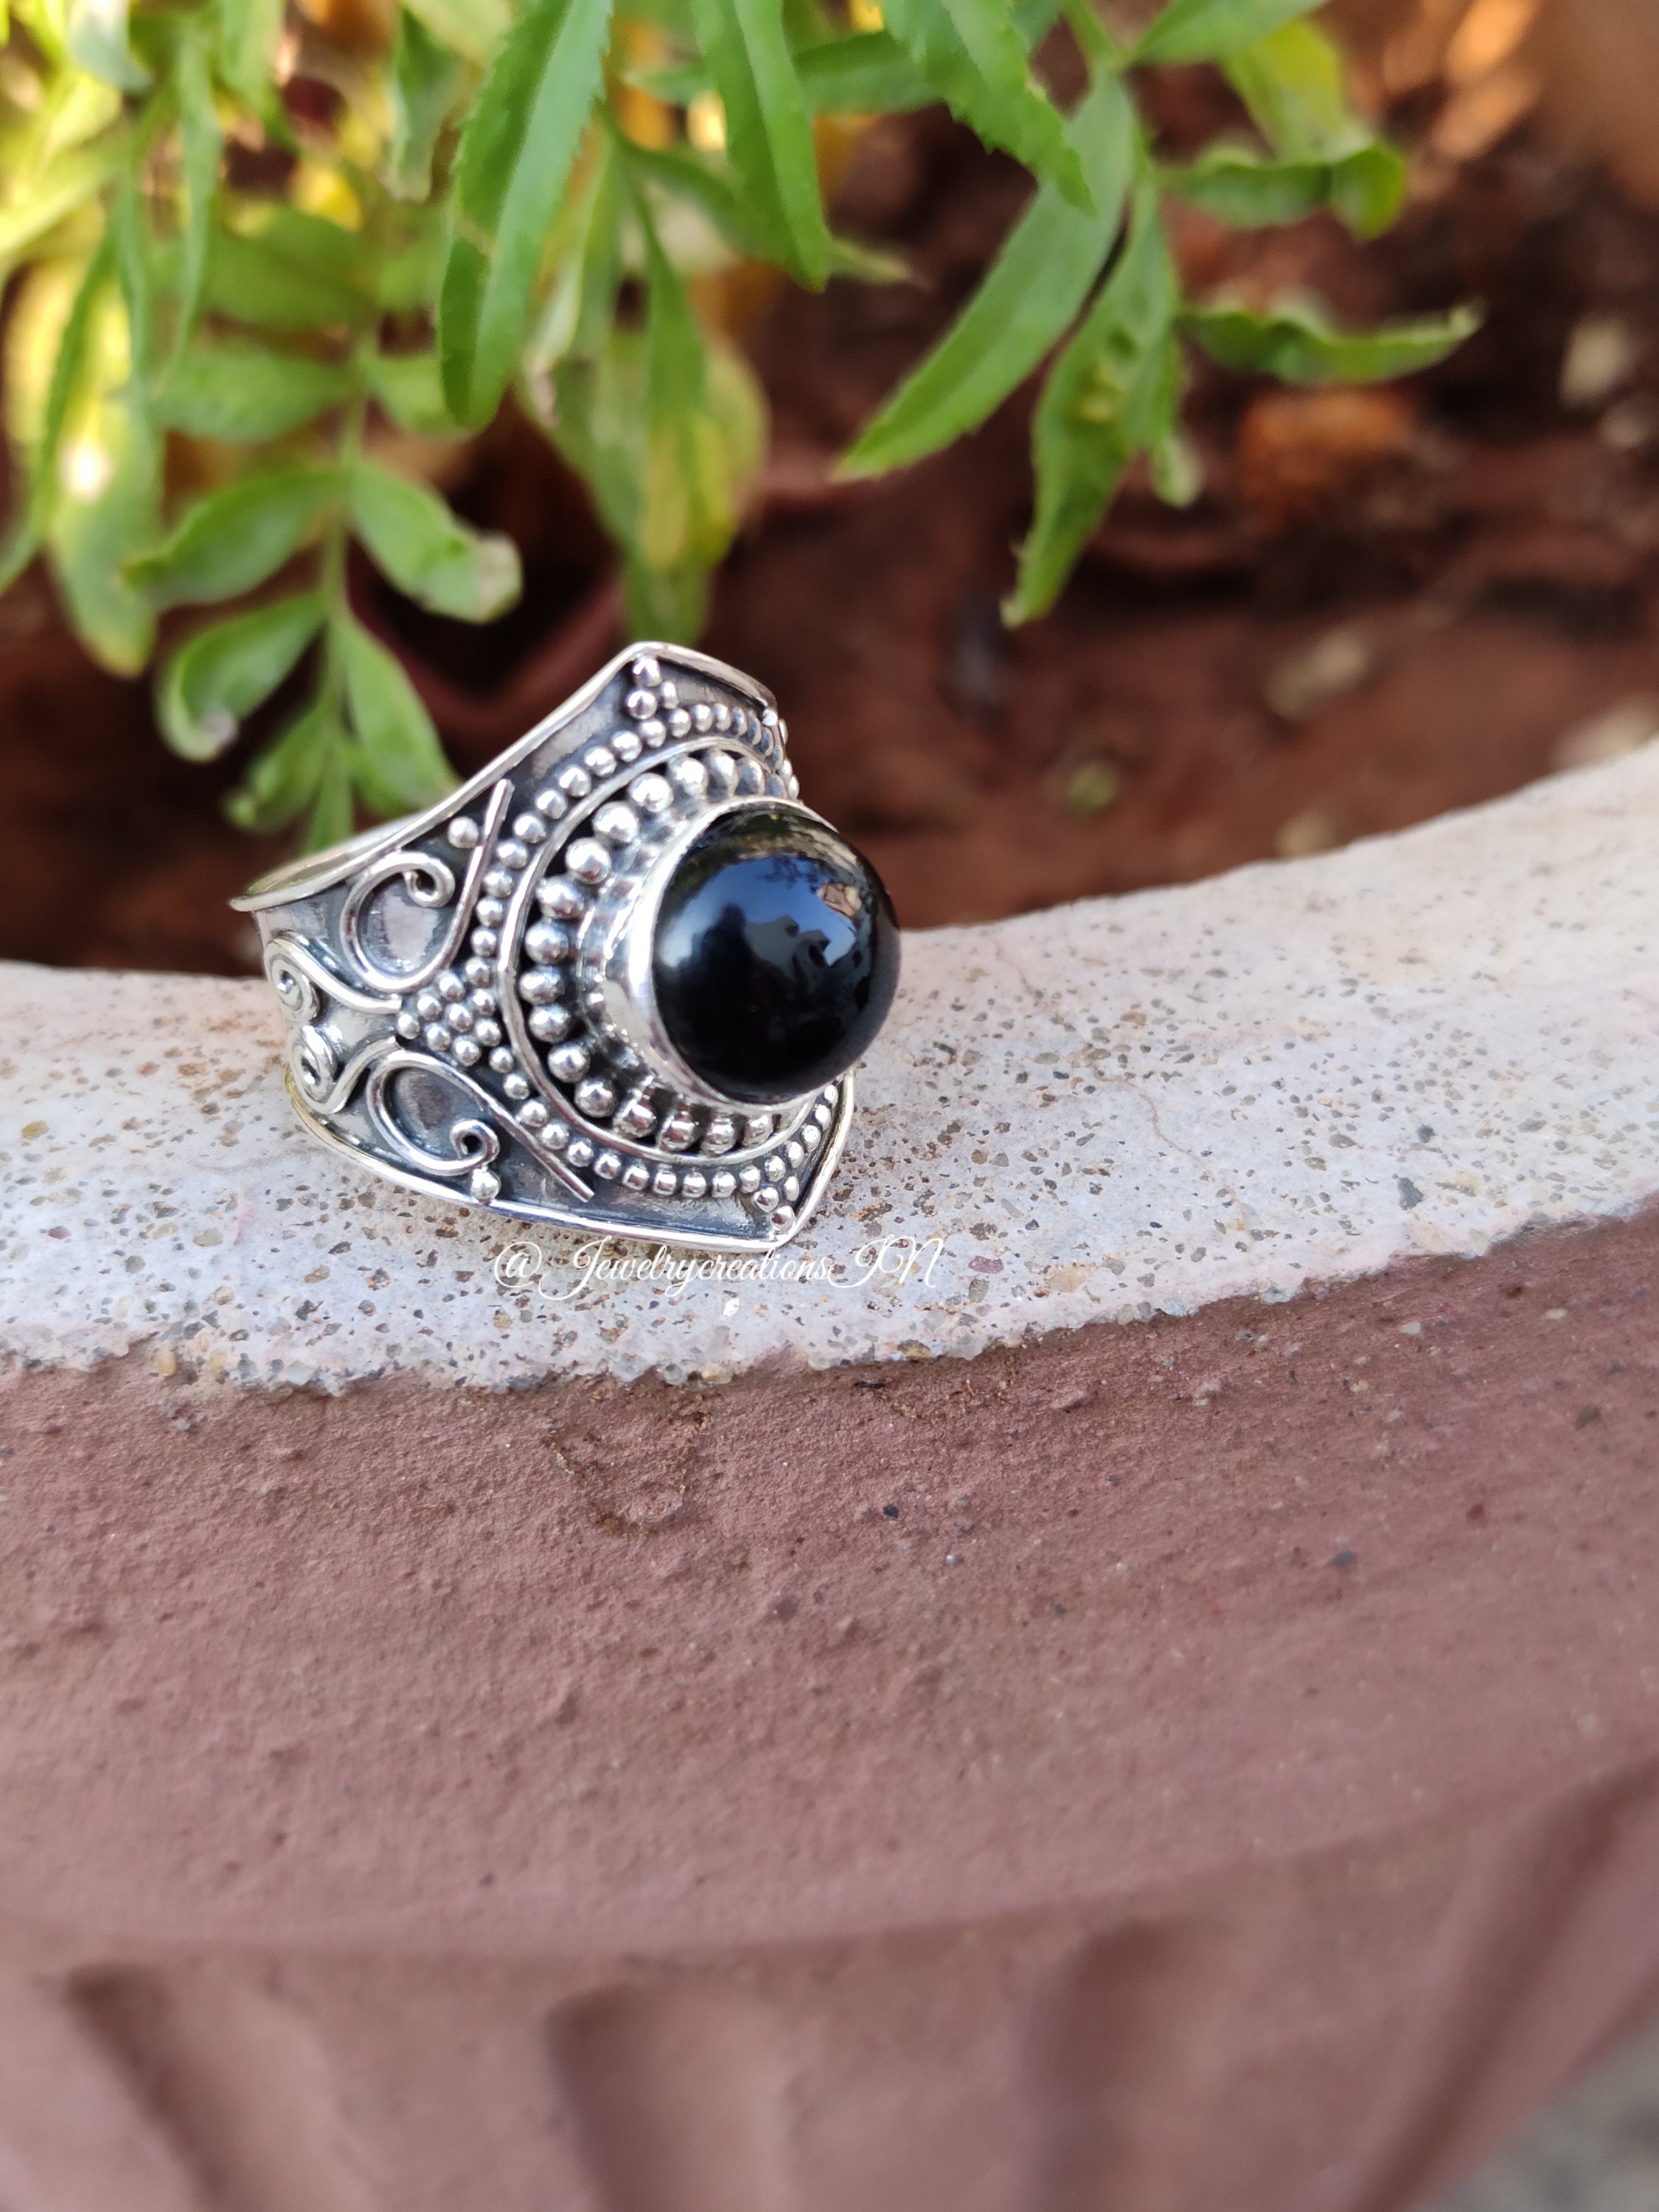 Buy Black Onyx Ring Sterling Silver Wide Band Ring Statement Online in ...